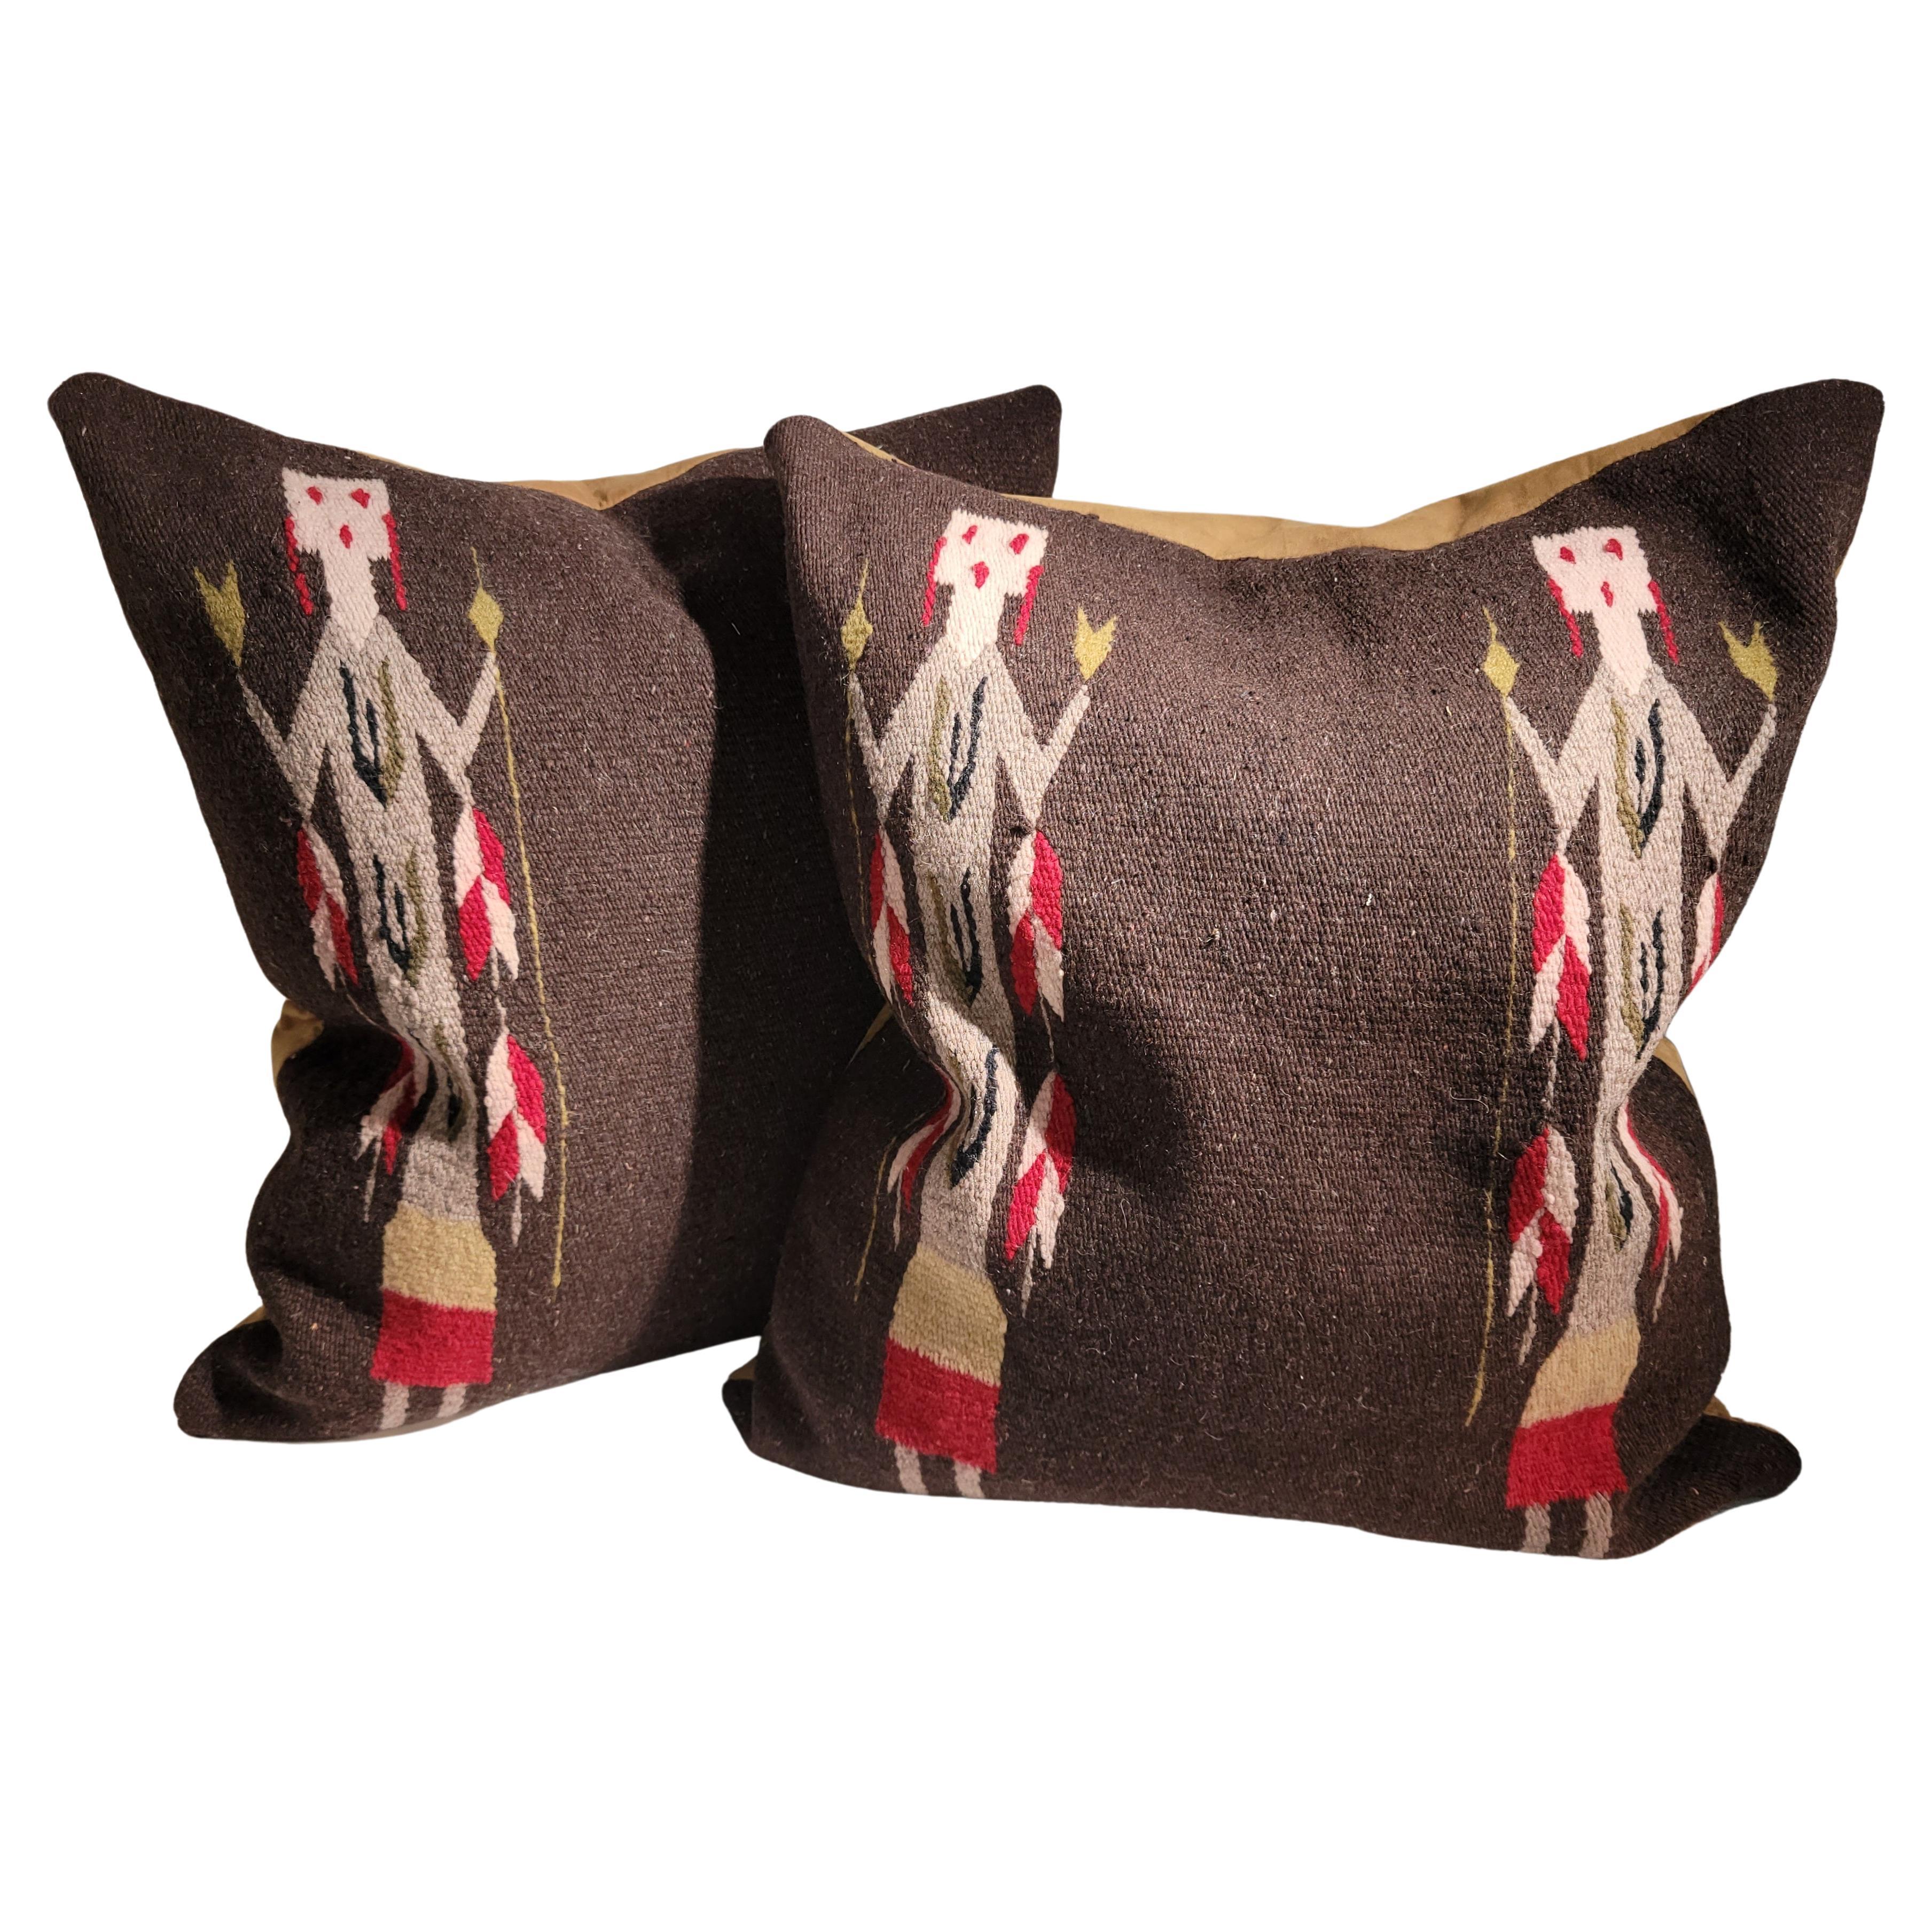  Yei Navajo Indian Weaving Pillows -Pair For Sale